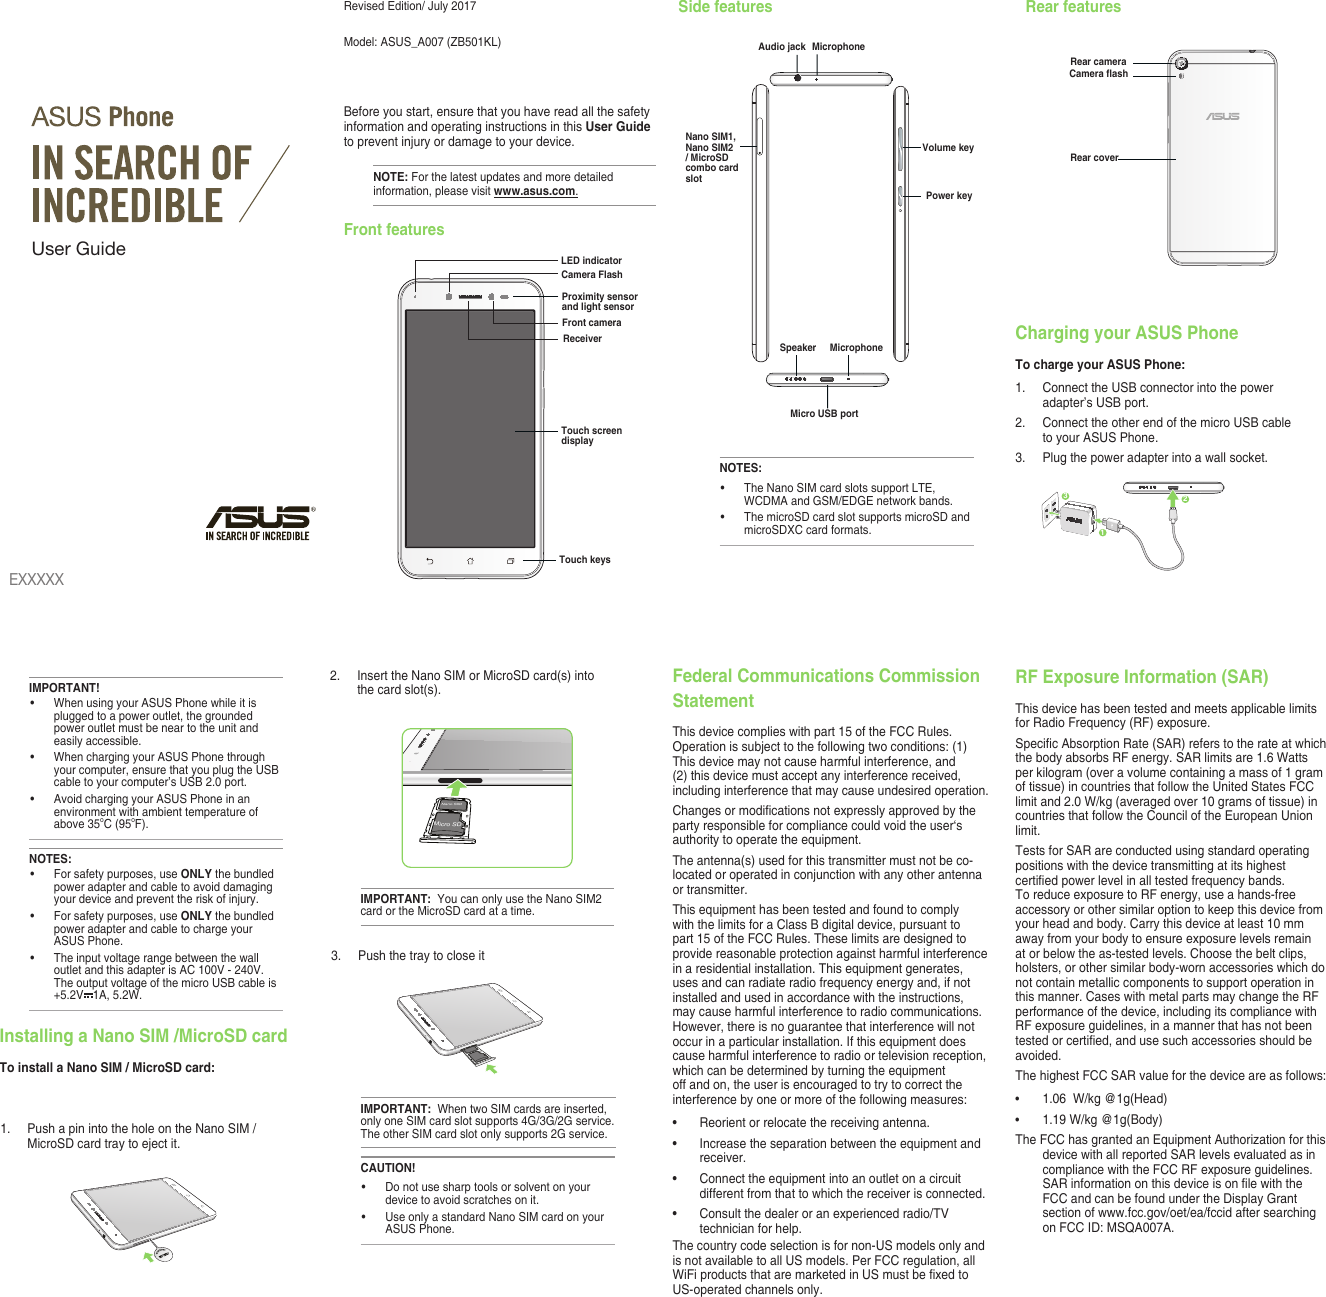 Revised Edition/ July 2017Model:  ASUS_A007 (ZB501KL)Before you start, ensure that you have read all the safety information and operating instructions in this User Guide to prevent injury or damage to your device.NOTE: For the latest updates and more detailed information, please visit www.asus.com.Front featuresSide features Rear featuresEXXXXXUser GuideTouch screen displayReceiverTouch keysFront cameraLED indicatorCamera FlashProximity sensor and light sensorPower keyAudio jackMicro USB portMicrophoneVolume keySpeaker MicrophoneNOTES:• TheNanoSIMcardslotssupportLTE,WCDMA and GSM/EDGE network bands. • ThemicroSDcardslotsupportsmicroSDandmicroSDXC card formats.Nano SIM1, Nano SIM2 / MicroSD combo card slotRear cameraCamera ashRear coverCharging your ASUS PhoneTo charge your ASUS Phone:1.  Connect the USB connector into the power adapter’s USB port.2.  Connect the other end of the micro USB cable to your ASUS Phone. 3.   Plug the power adapter into a wall socket.NOTES:• Forsafetypurposes,useONLY the bundled power adapter and cable to avoid damaging your device and prevent the risk of injury.• Forsafetypurposes,useONLY the bundled power adapter and cable to charge your ASUS Phone.• Theinputvoltagerangebetweenthewalloutlet and this adapter is AC 100V - 240V. TheoutputvoltageofthemicroUSBcableis+5.2V 1A, 5.2W. IMPORTANT!• WhenusingyourASUSPhonewhileitisplugged to a power outlet, the grounded power outlet must be near to the unit and easily accessible.• WhenchargingyourASUSPhonethroughyour computer, ensure that you plug the USB cable to your computer’s USB 2.0 port.• AvoidchargingyourASUSPhoneinanenvironment with ambient temperature of above 35oC (95oF). 312Installing a Nano SIM /MicroSD cardTo install a Nano SIM / MicroSD card:1. PushapinintotheholeontheNanoSIM/MicroSD card tray to eject it.2. InserttheNanoSIMorMicroSDcard(s)intothe card slot(s).Micro SDNano SIMIMPORTANT:  YoucanonlyusetheNanoSIM2card or the MicroSD card at a time.CAUTION!• Donotusesharptoolsorsolventonyourdevice to avoid scratches on it. • UseonlyastandardNanoSIMcardonyourASUS Phone. 3.  Push the tray to close itIMPORTANT:  WhentwoSIMcardsareinserted,onlyoneSIMcardslotsupports4G/3G/2Gservice.TheotherSIMcardslotonlysupports2Gservice.Federal Communications Commission StatementThisdevicecomplieswithpart15oftheFCCRules.Operation is subject to the following two conditions: (1) Thisdevicemaynotcauseharmfulinterference,and(2) this device must accept any interference received, including interference that may cause undesired operation.Changesormodicationsnotexpresslyapprovedbytheparty responsible for compliance could void the user‘s authority to operate the equipment.Theantenna(s)usedforthistransmittermustnotbeco-located or operated in conjunction with any other antenna or transmitter.Thisequipmenthasbeentestedandfoundtocomplywith the limits for a Class B digital device, pursuant to part15oftheFCCRules.Theselimitsaredesignedtoprovide reasonable protection against harmful interference inaresidentialinstallation.Thisequipmentgenerates,uses and can radiate radio frequency energy and, if not installed and used in accordance with the instructions, may cause harmful interference to radio communications. However, there is no guarantee that interference will not occurinaparticularinstallation.Ifthisequipmentdoescause harmful interference to radio or television reception, which can be determined by turning the equipment off and on, the user is encouraged to try to correct the interference by one or more of the following measures:• Reorientorrelocatethereceivingantenna.• Increasetheseparationbetweentheequipmentandreceiver.• Connecttheequipmentintoanoutletonacircuitdifferent from that to which the receiver is connected.• Consultthedealeroranexperiencedradio/TVtechnician for help.Thecountrycodeselectionisfornon-USmodelsonlyandis not available to all US models. Per FCC regulation, all WiFiproductsthataremarketedinUSmustbexedtoUS-operated channels only. RF Exposure Information (SAR)ThisdevicehasbeentestedandmeetsapplicablelimitsforRadioFrequency(RF)exposure.SpecicAbsorptionRate(SAR)referstotherateatwhichthe body absorbs RF energy. SAR limits are 1.6 Watts per kilogram (over a volume containing a mass of 1 gram of tissue) in countries that follow the United States FCC limit and 2.0 W/kg (averaged over 10 grams of tissue) in countries that follow the Council of the European Union limit.TestsforSARareconductedusingstandardoperatingpositions with the device transmitting at its highest certiedpowerlevelinalltestedfrequencybands.ToreduceexposuretoRFenergy,useahands-freeaccessory or other similar option to keep this device from your head and body. Carry this device at least 10 mm awayfromyourbodytoensureexposurelevelsremainat or below the as-tested levels. Choose the belt clips, holsters, or other similar body-worn accessories which do not contain metallic components to support operation in this manner. Cases with metal parts may change the RF performance of the device, including its compliance with RFexposureguidelines,inamannerthathasnotbeentestedorcertied,andusesuchaccessoriesshouldbeavoided.ThehighestFCCSARvalueforthedeviceareasfollows:• 1.06  W/kg @1g(Head)• 1.19 W/kg @1g(Body)TheFCChasgrantedanEquipmentAuthorizationforthisdevice with all reported SAR levels evaluated as in compliancewiththeFCCRFexposureguidelines.SARinformationonthisdeviceisonlewiththeFCC and can be found under the Display Grant section of www.fcc.gov/oet/ea/fccid after searching onFCCID:MSQA007A.